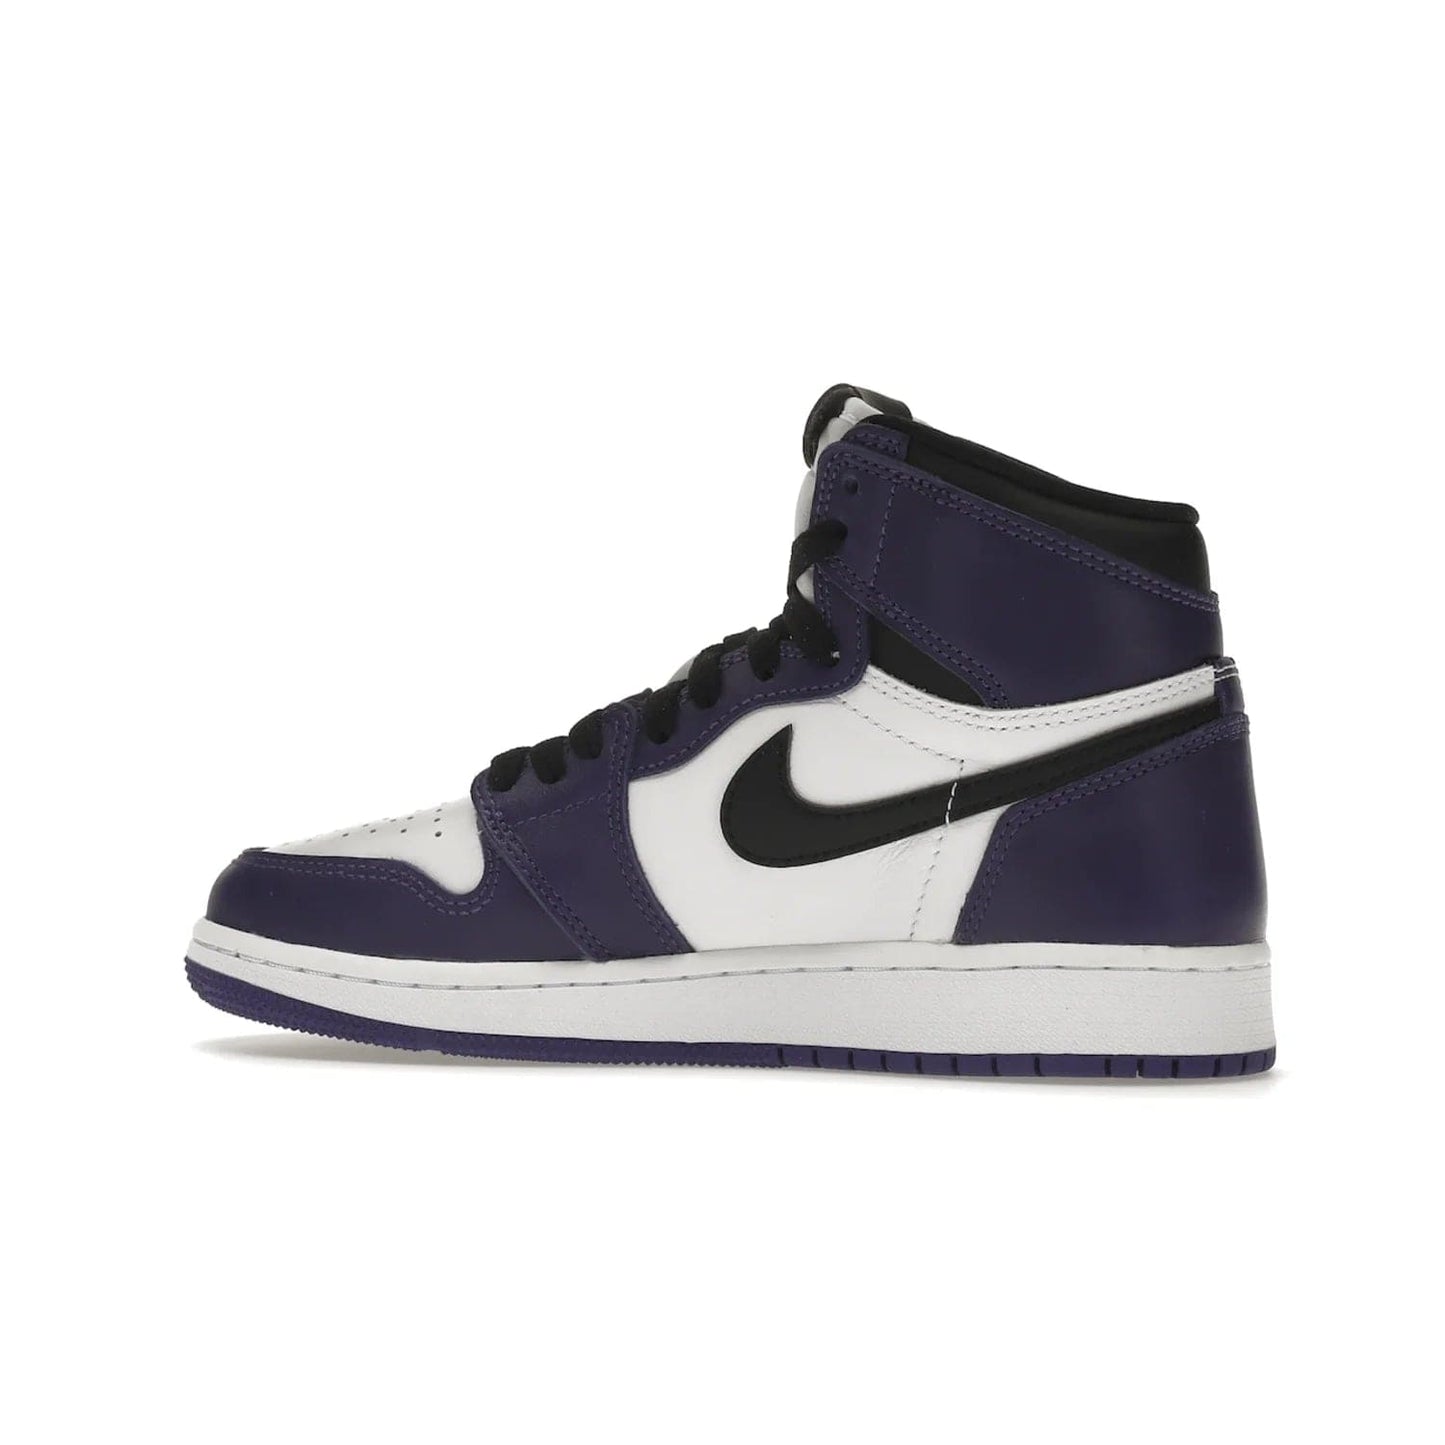 Jordan 1 Retro High Court Purple White (GS) - Image 21 - Only at www.BallersClubKickz.com - The Air Jordan 1 Retro High Court Purple is here and young sneaker heads can show off classic style. Features a white tumbled leather upper, black swoosh, purple overlays, black collar with purple overlay, white tongue, black patch with purple Nike Air logo and swoosh, white midsole, and purple rubber outsole with circular pattern.